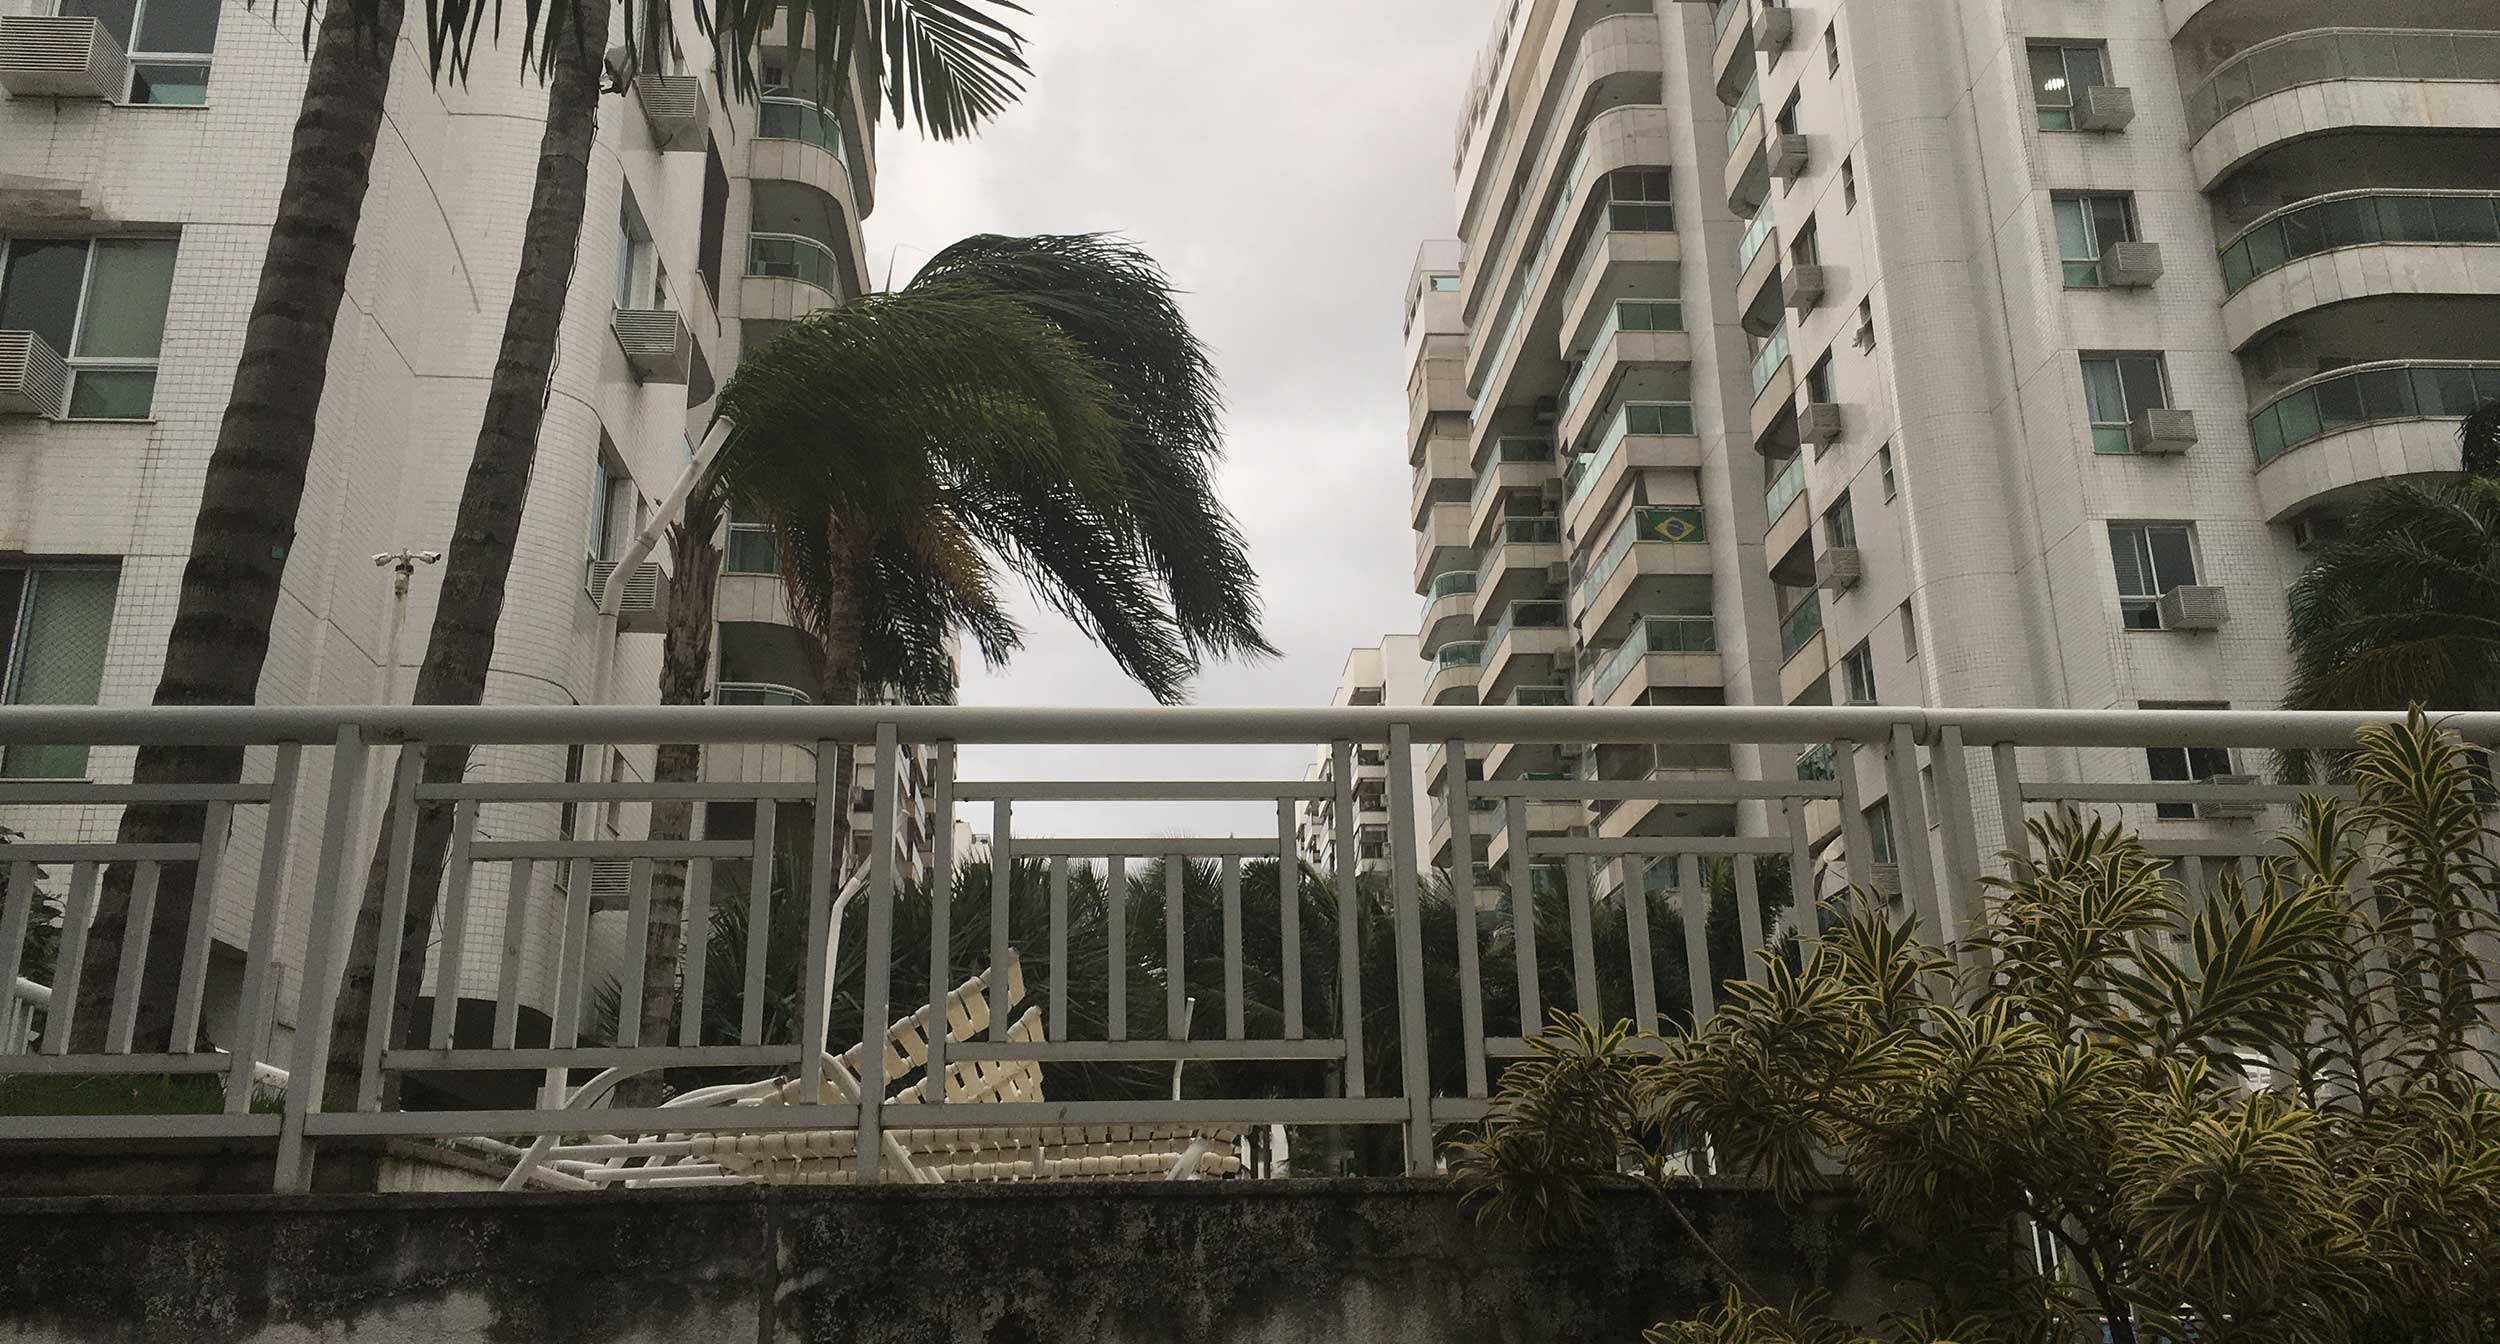 Palm trees bend in the wind at an apartment complex in Rio de Janeiro, Brazil